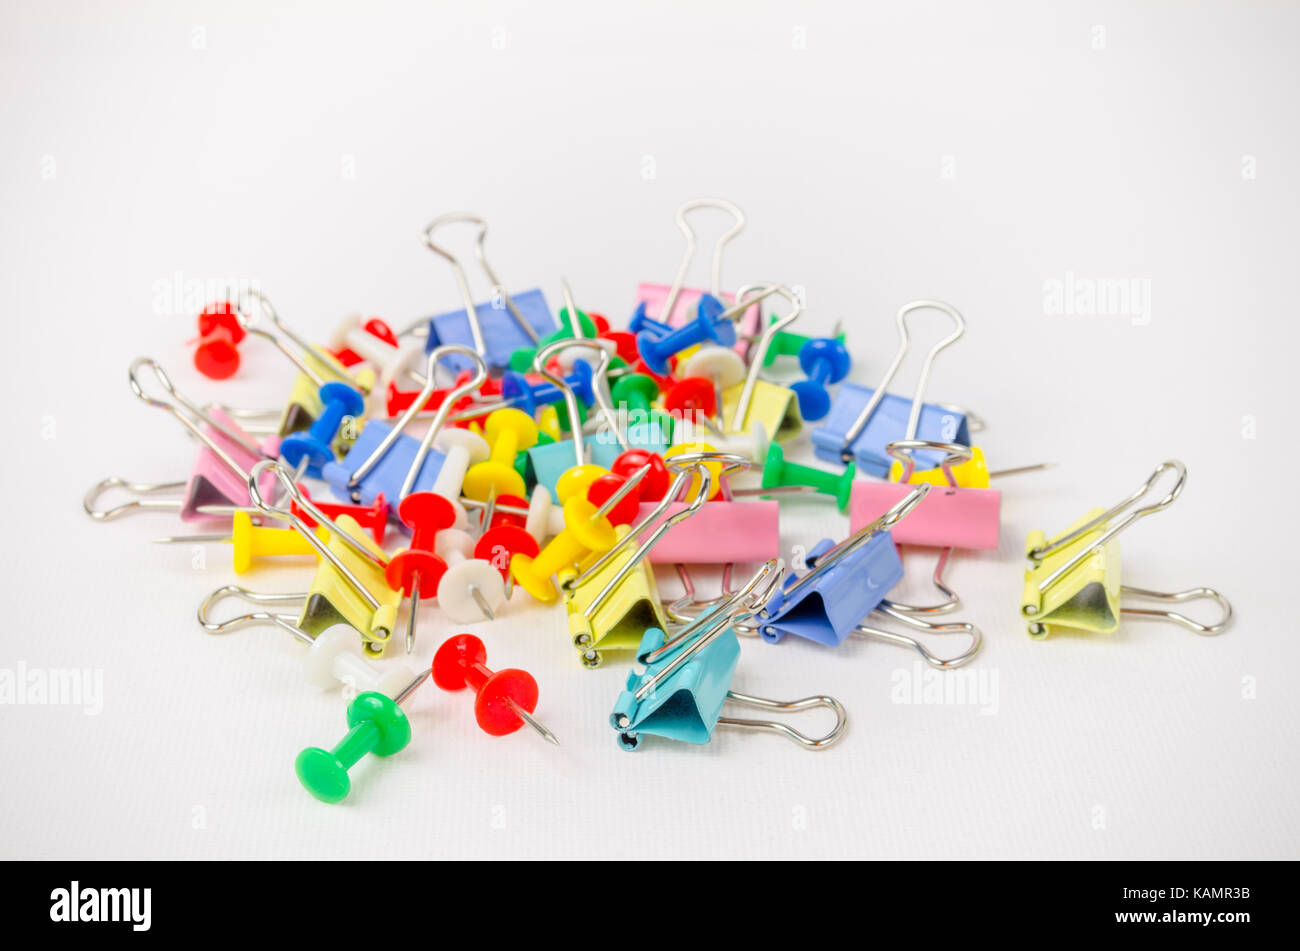 A Studio Photograph of a Group of Bulldog Clips and Drawing Pins Stock Photo